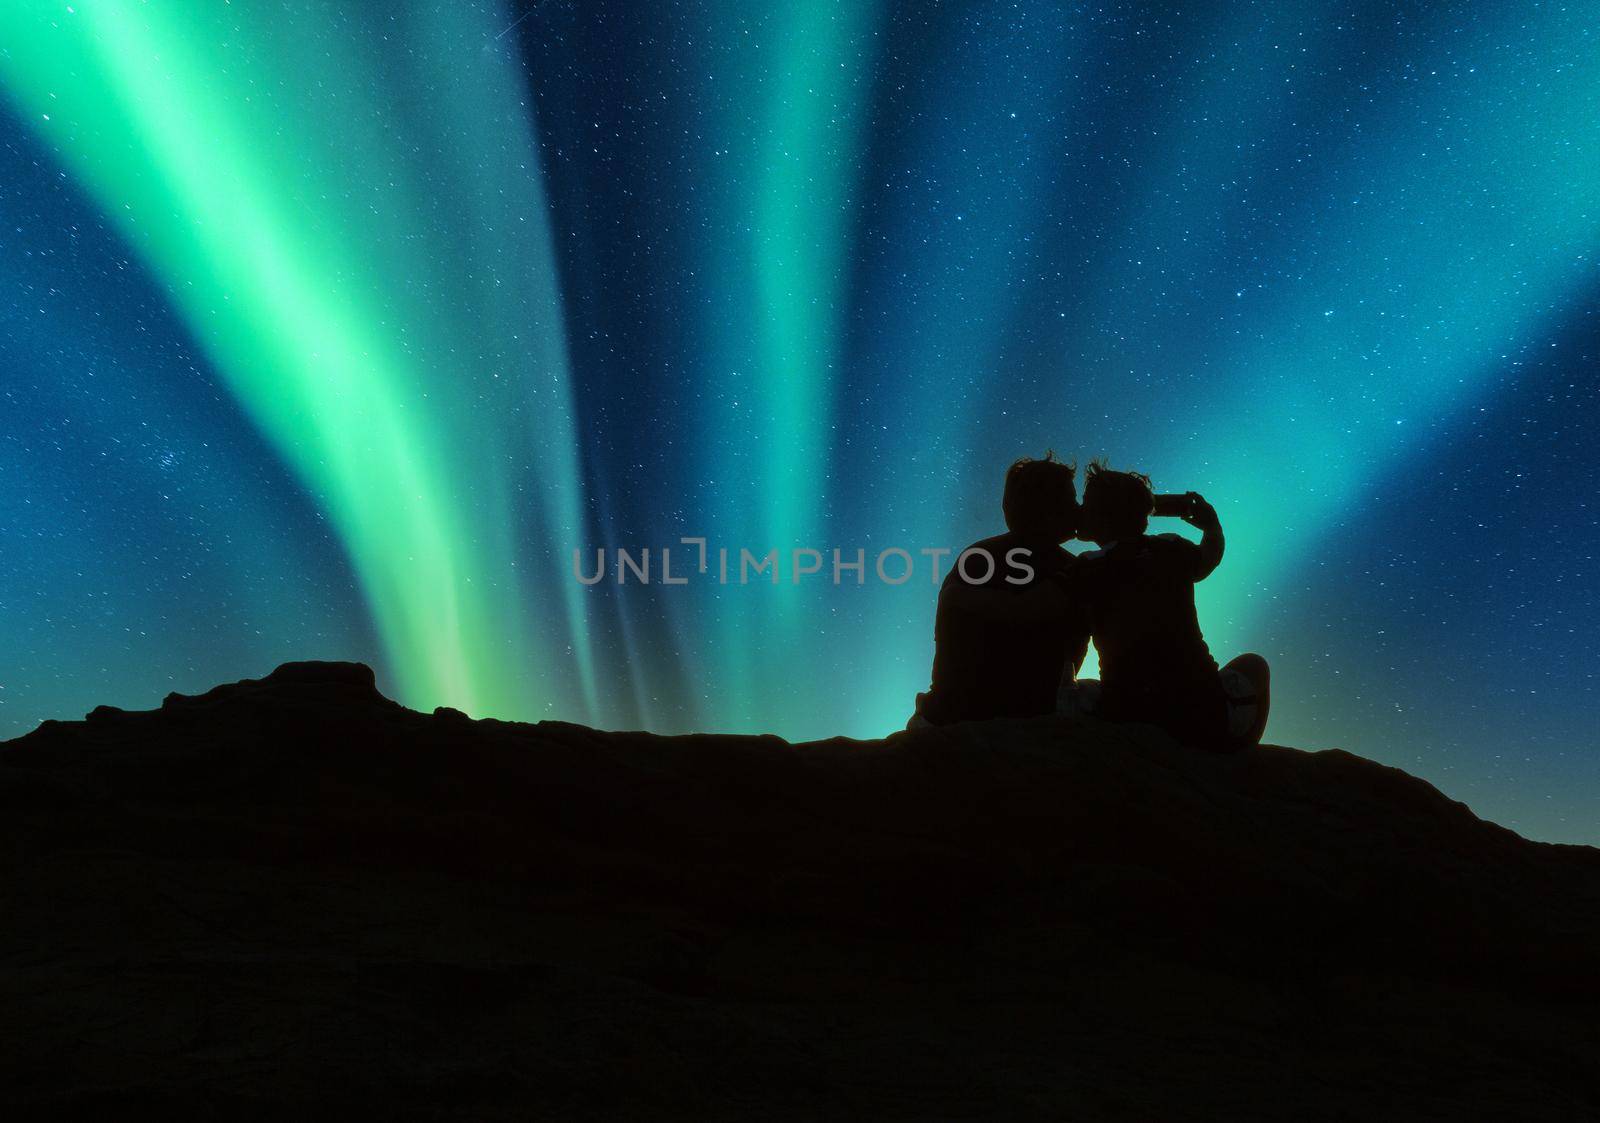 Couple kiss on a rock below the Green Aurora borealis shimmers by steffstarr